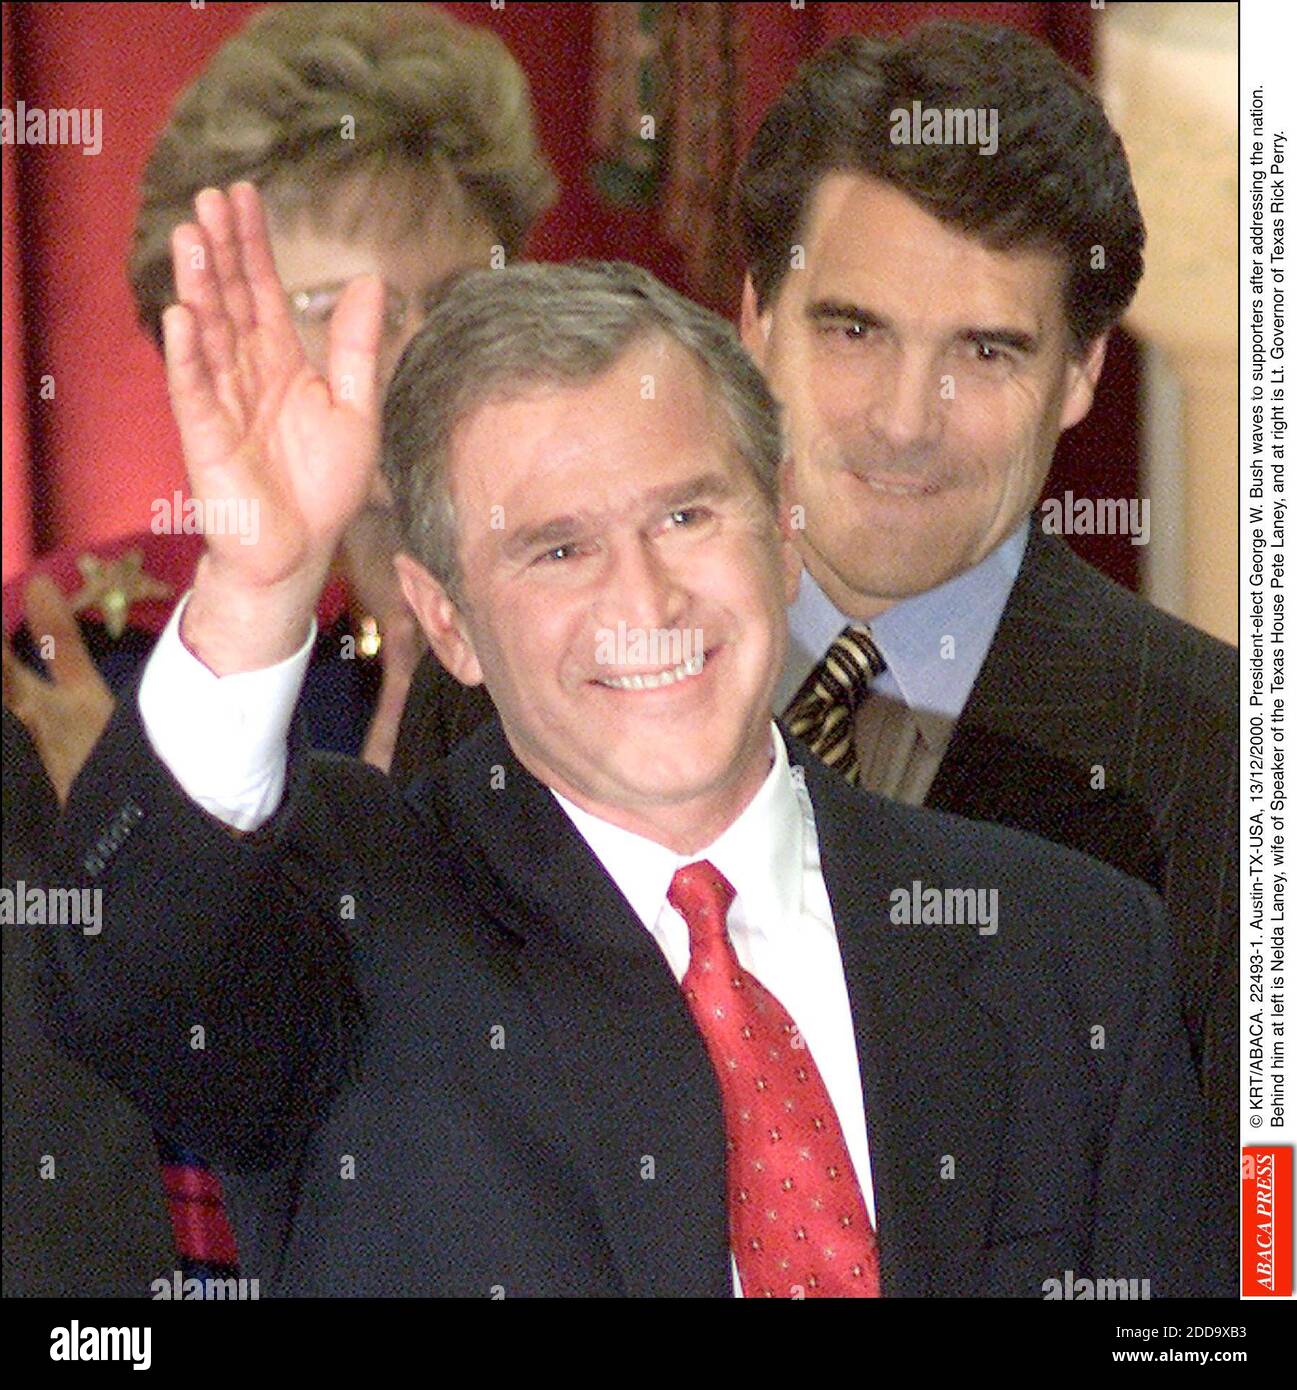 NO FILM, NO VIDEO, NO TV, NO DOCUMENTARY - © KRT/ABACA. 22493-1. Austin-TX-USA, 13/12/2000. President-elect George W. Bush waves to supporters after addressing the nation. Behind him at left is Nelda Laney, wife of Speaker of the Texas House Pete Laney, and at right is Lt. Governor of Texas Rick P Stock Photo